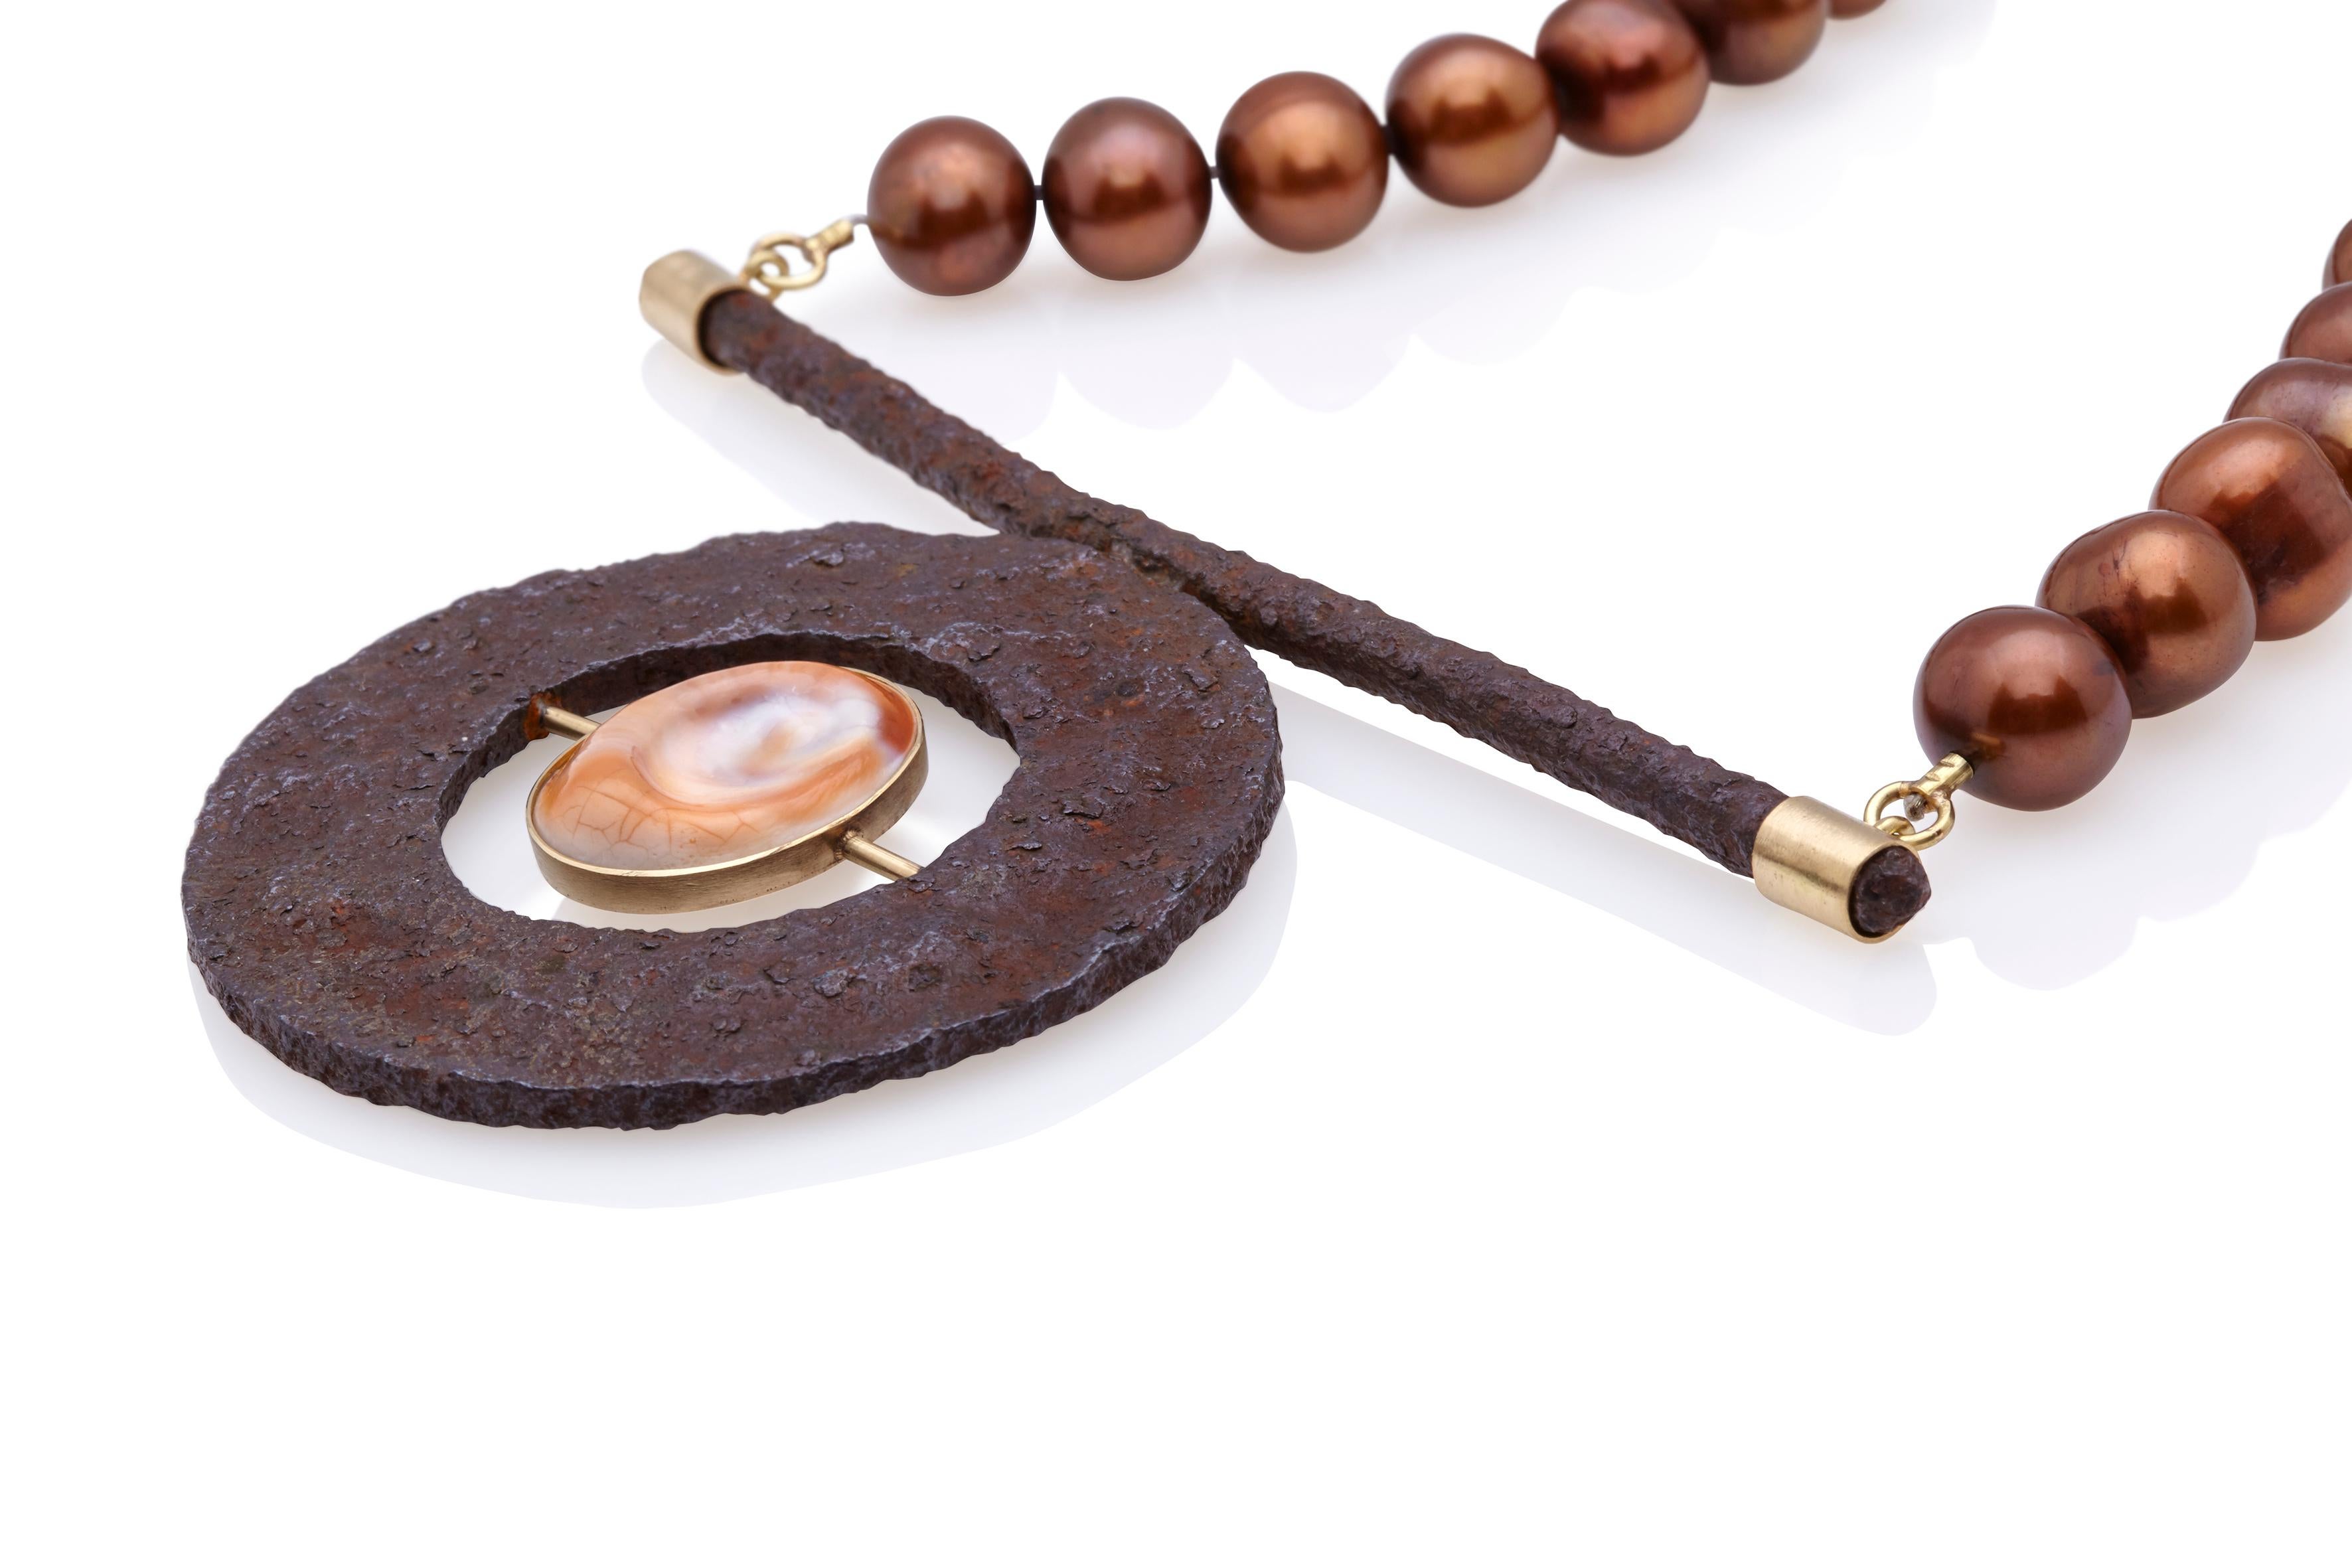 An exceptional and unique necklace made of round founded rusty object, chocolate pearl, operculla (cat's eye shell) and 18Kt yellow gold. A unique piece that will catch everyone's eye and will add a serious statement to your outfit. Handcrafted